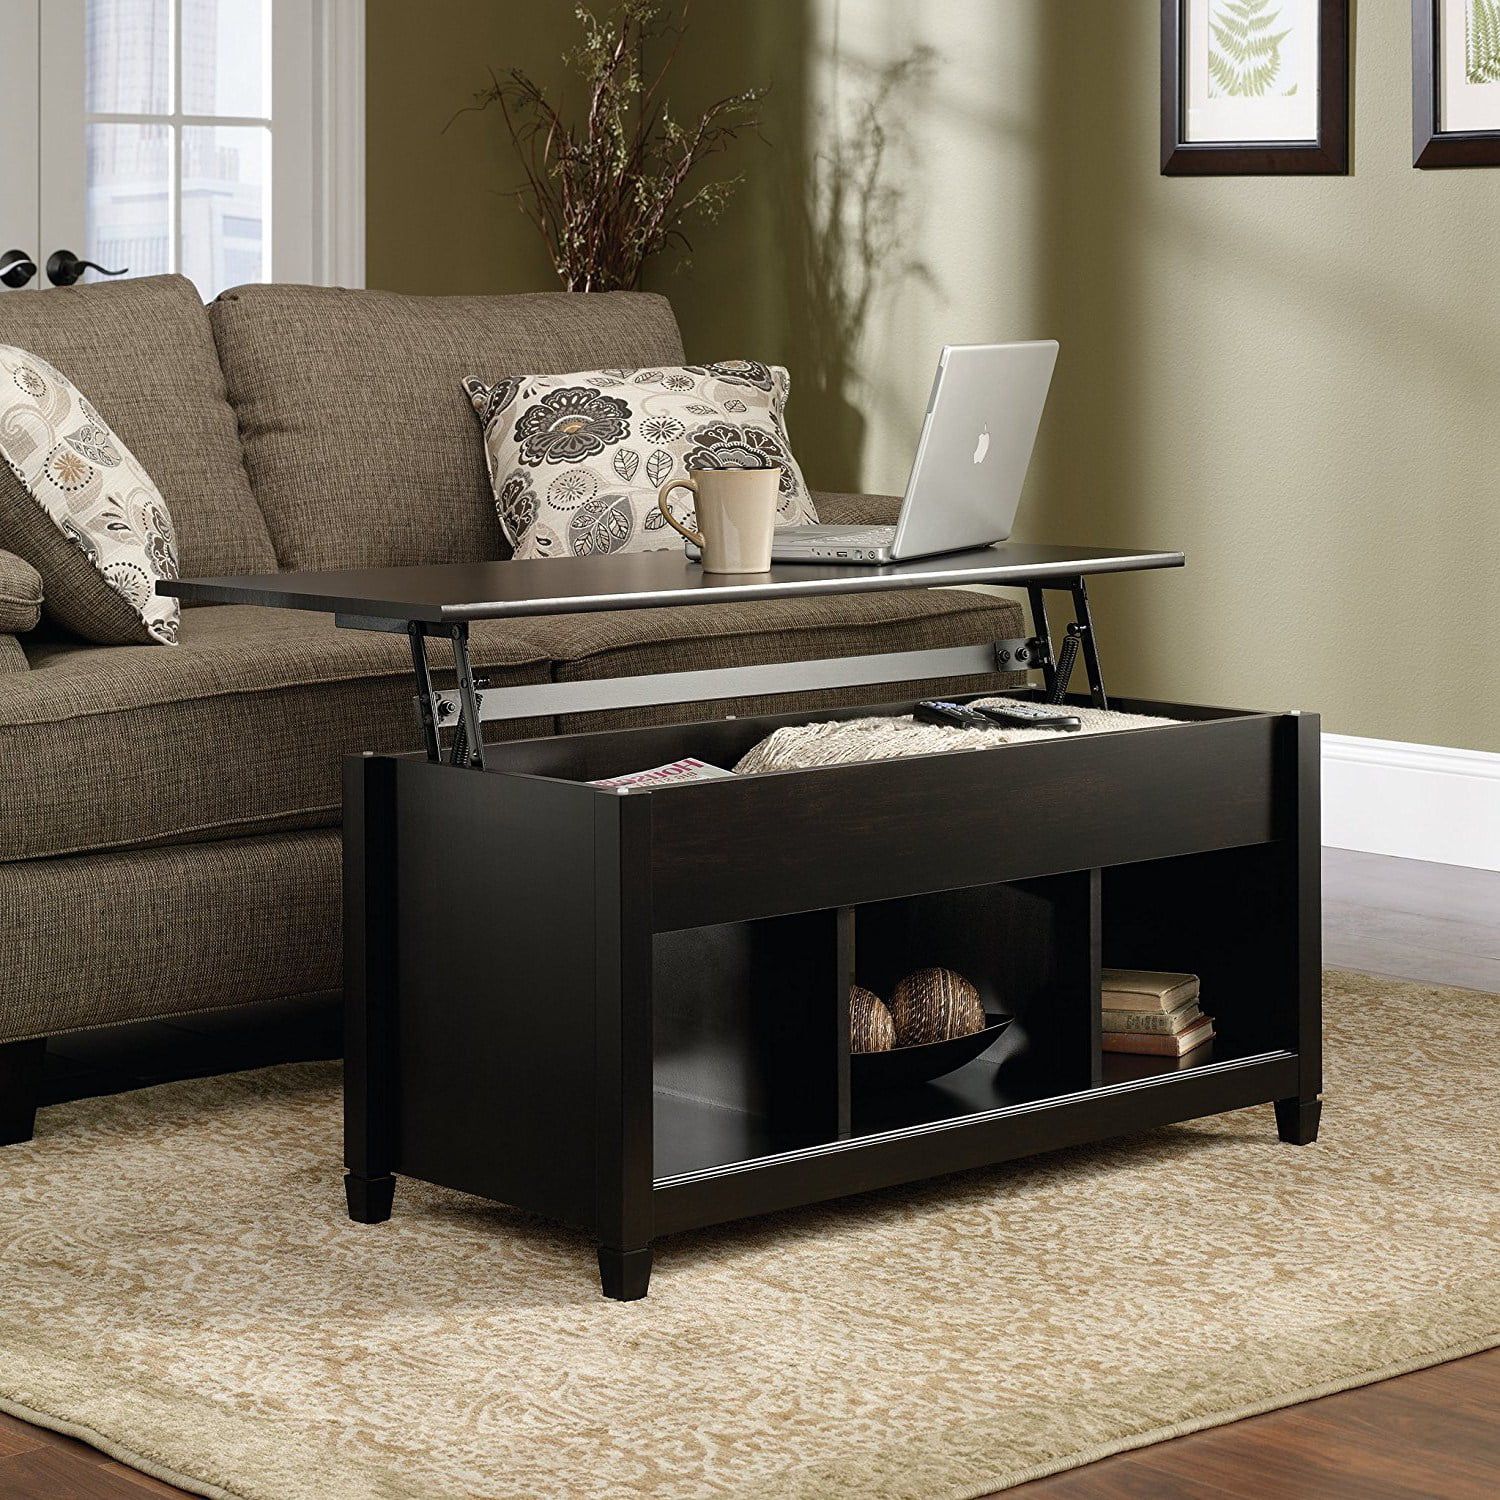 Zimtown Lift Up Top Coffee Table With Hidden Compartment End Rectangle With Regard To Modern Coffee Tables With Hidden Storage Compartments (View 16 of 20)